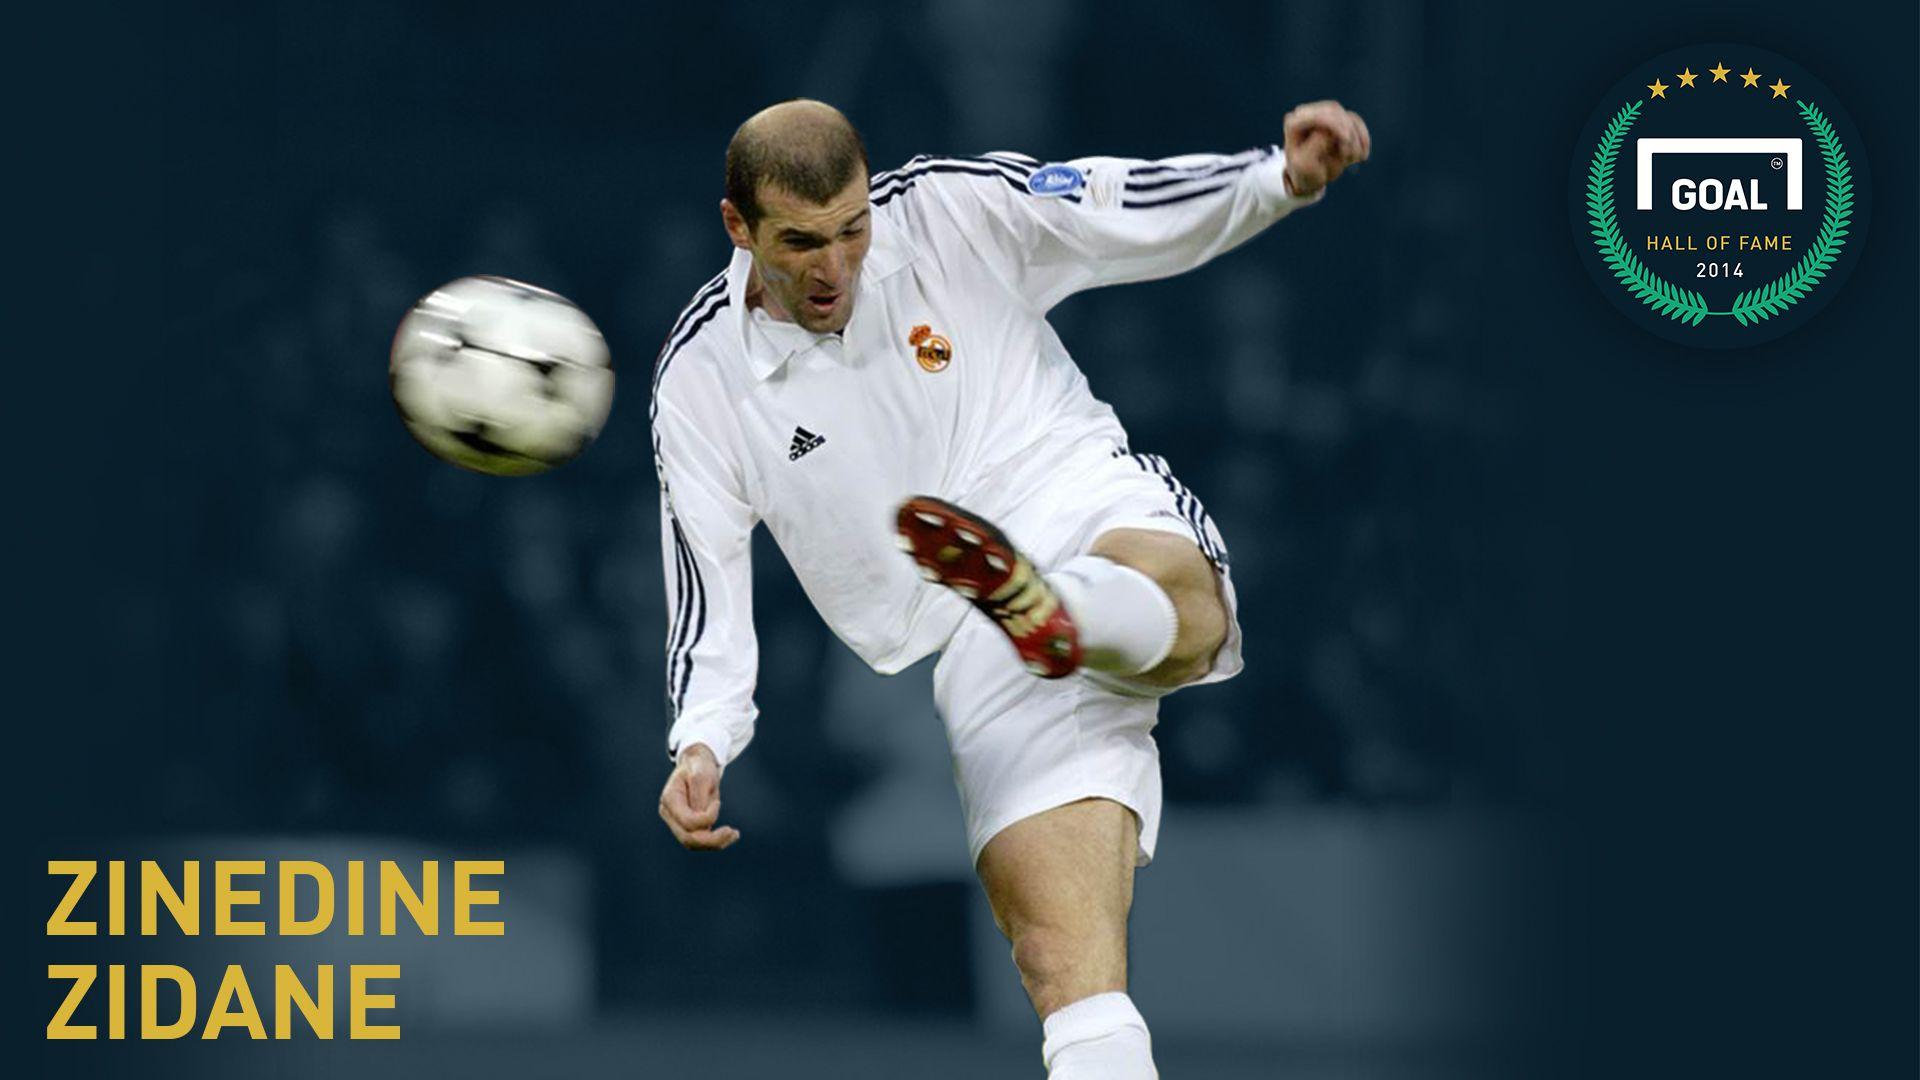 Gallery: Hall of Fame Zidane in picture